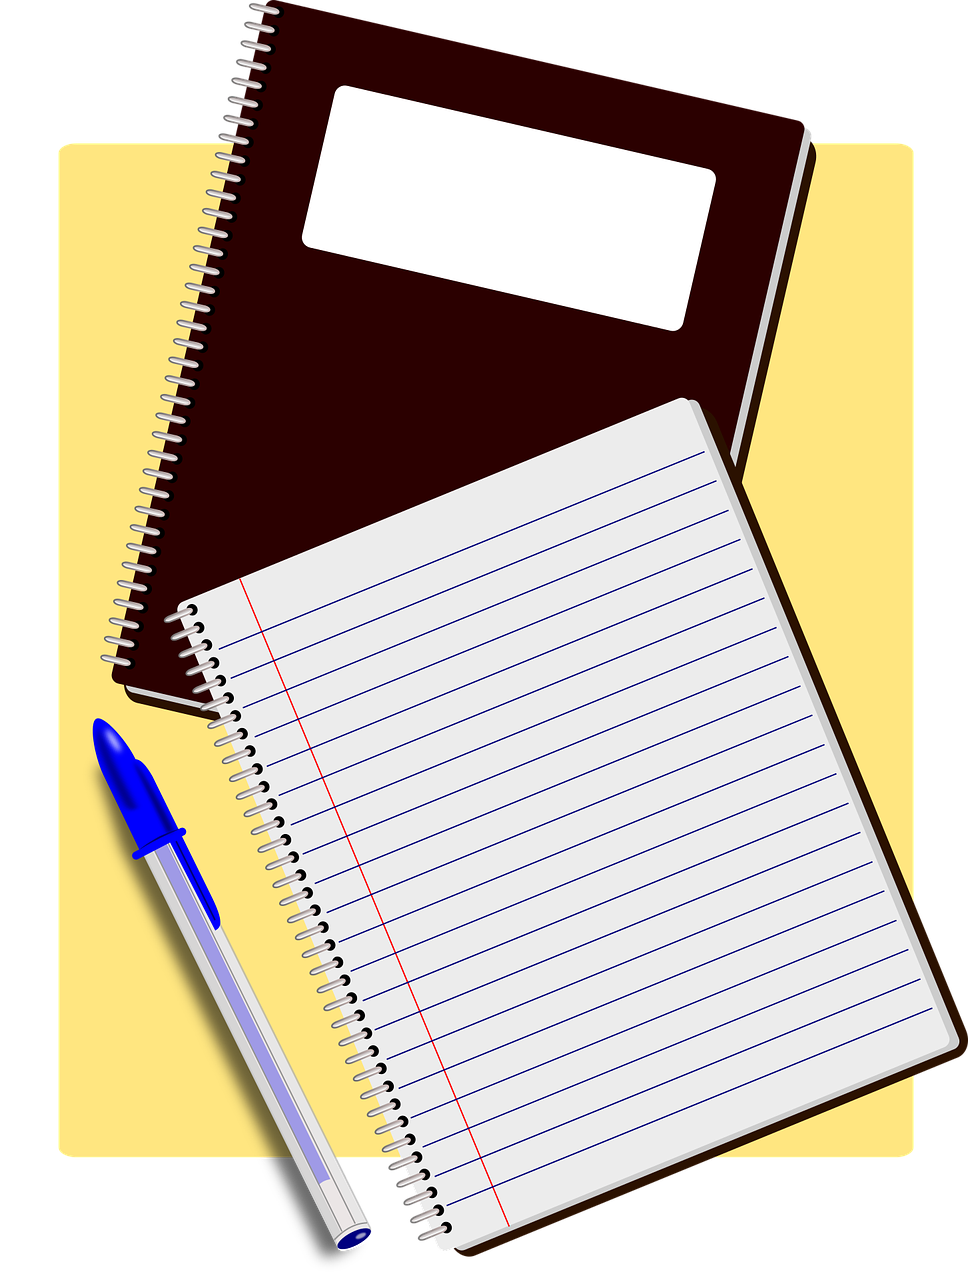 Notebook PNG HD Image